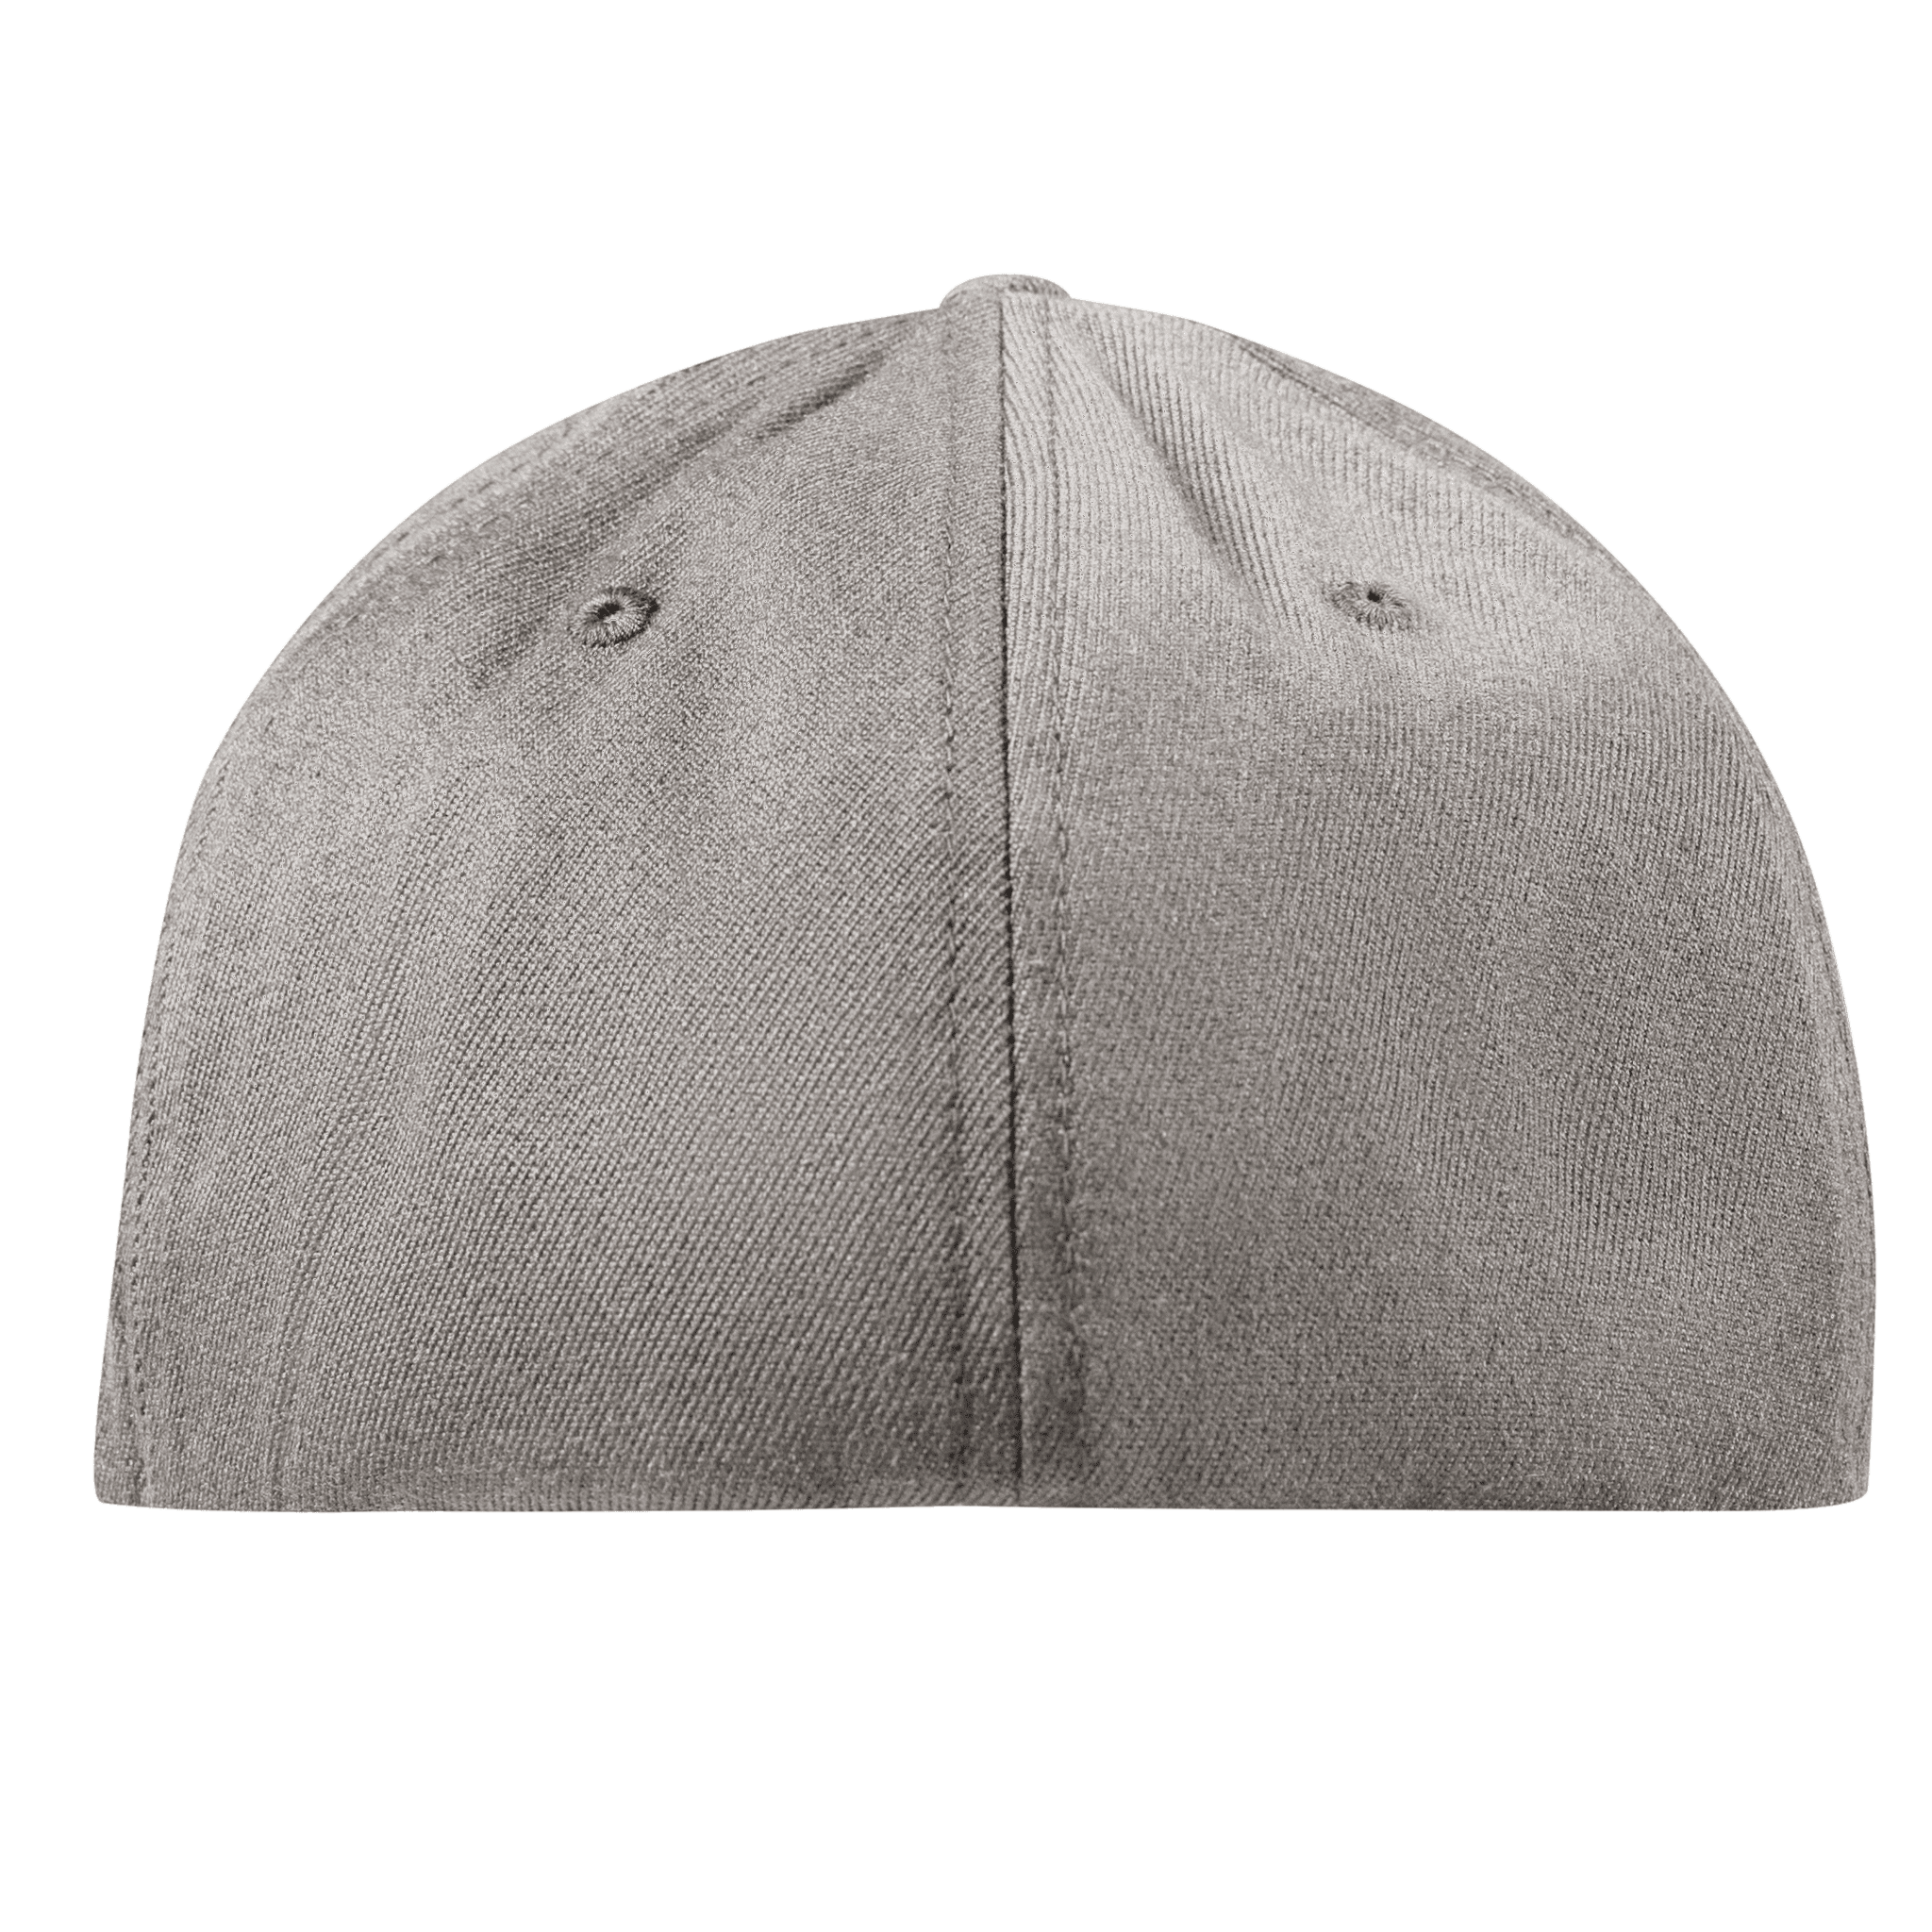 Indiana Patriot Flexfit Fitted Back Heather Grey